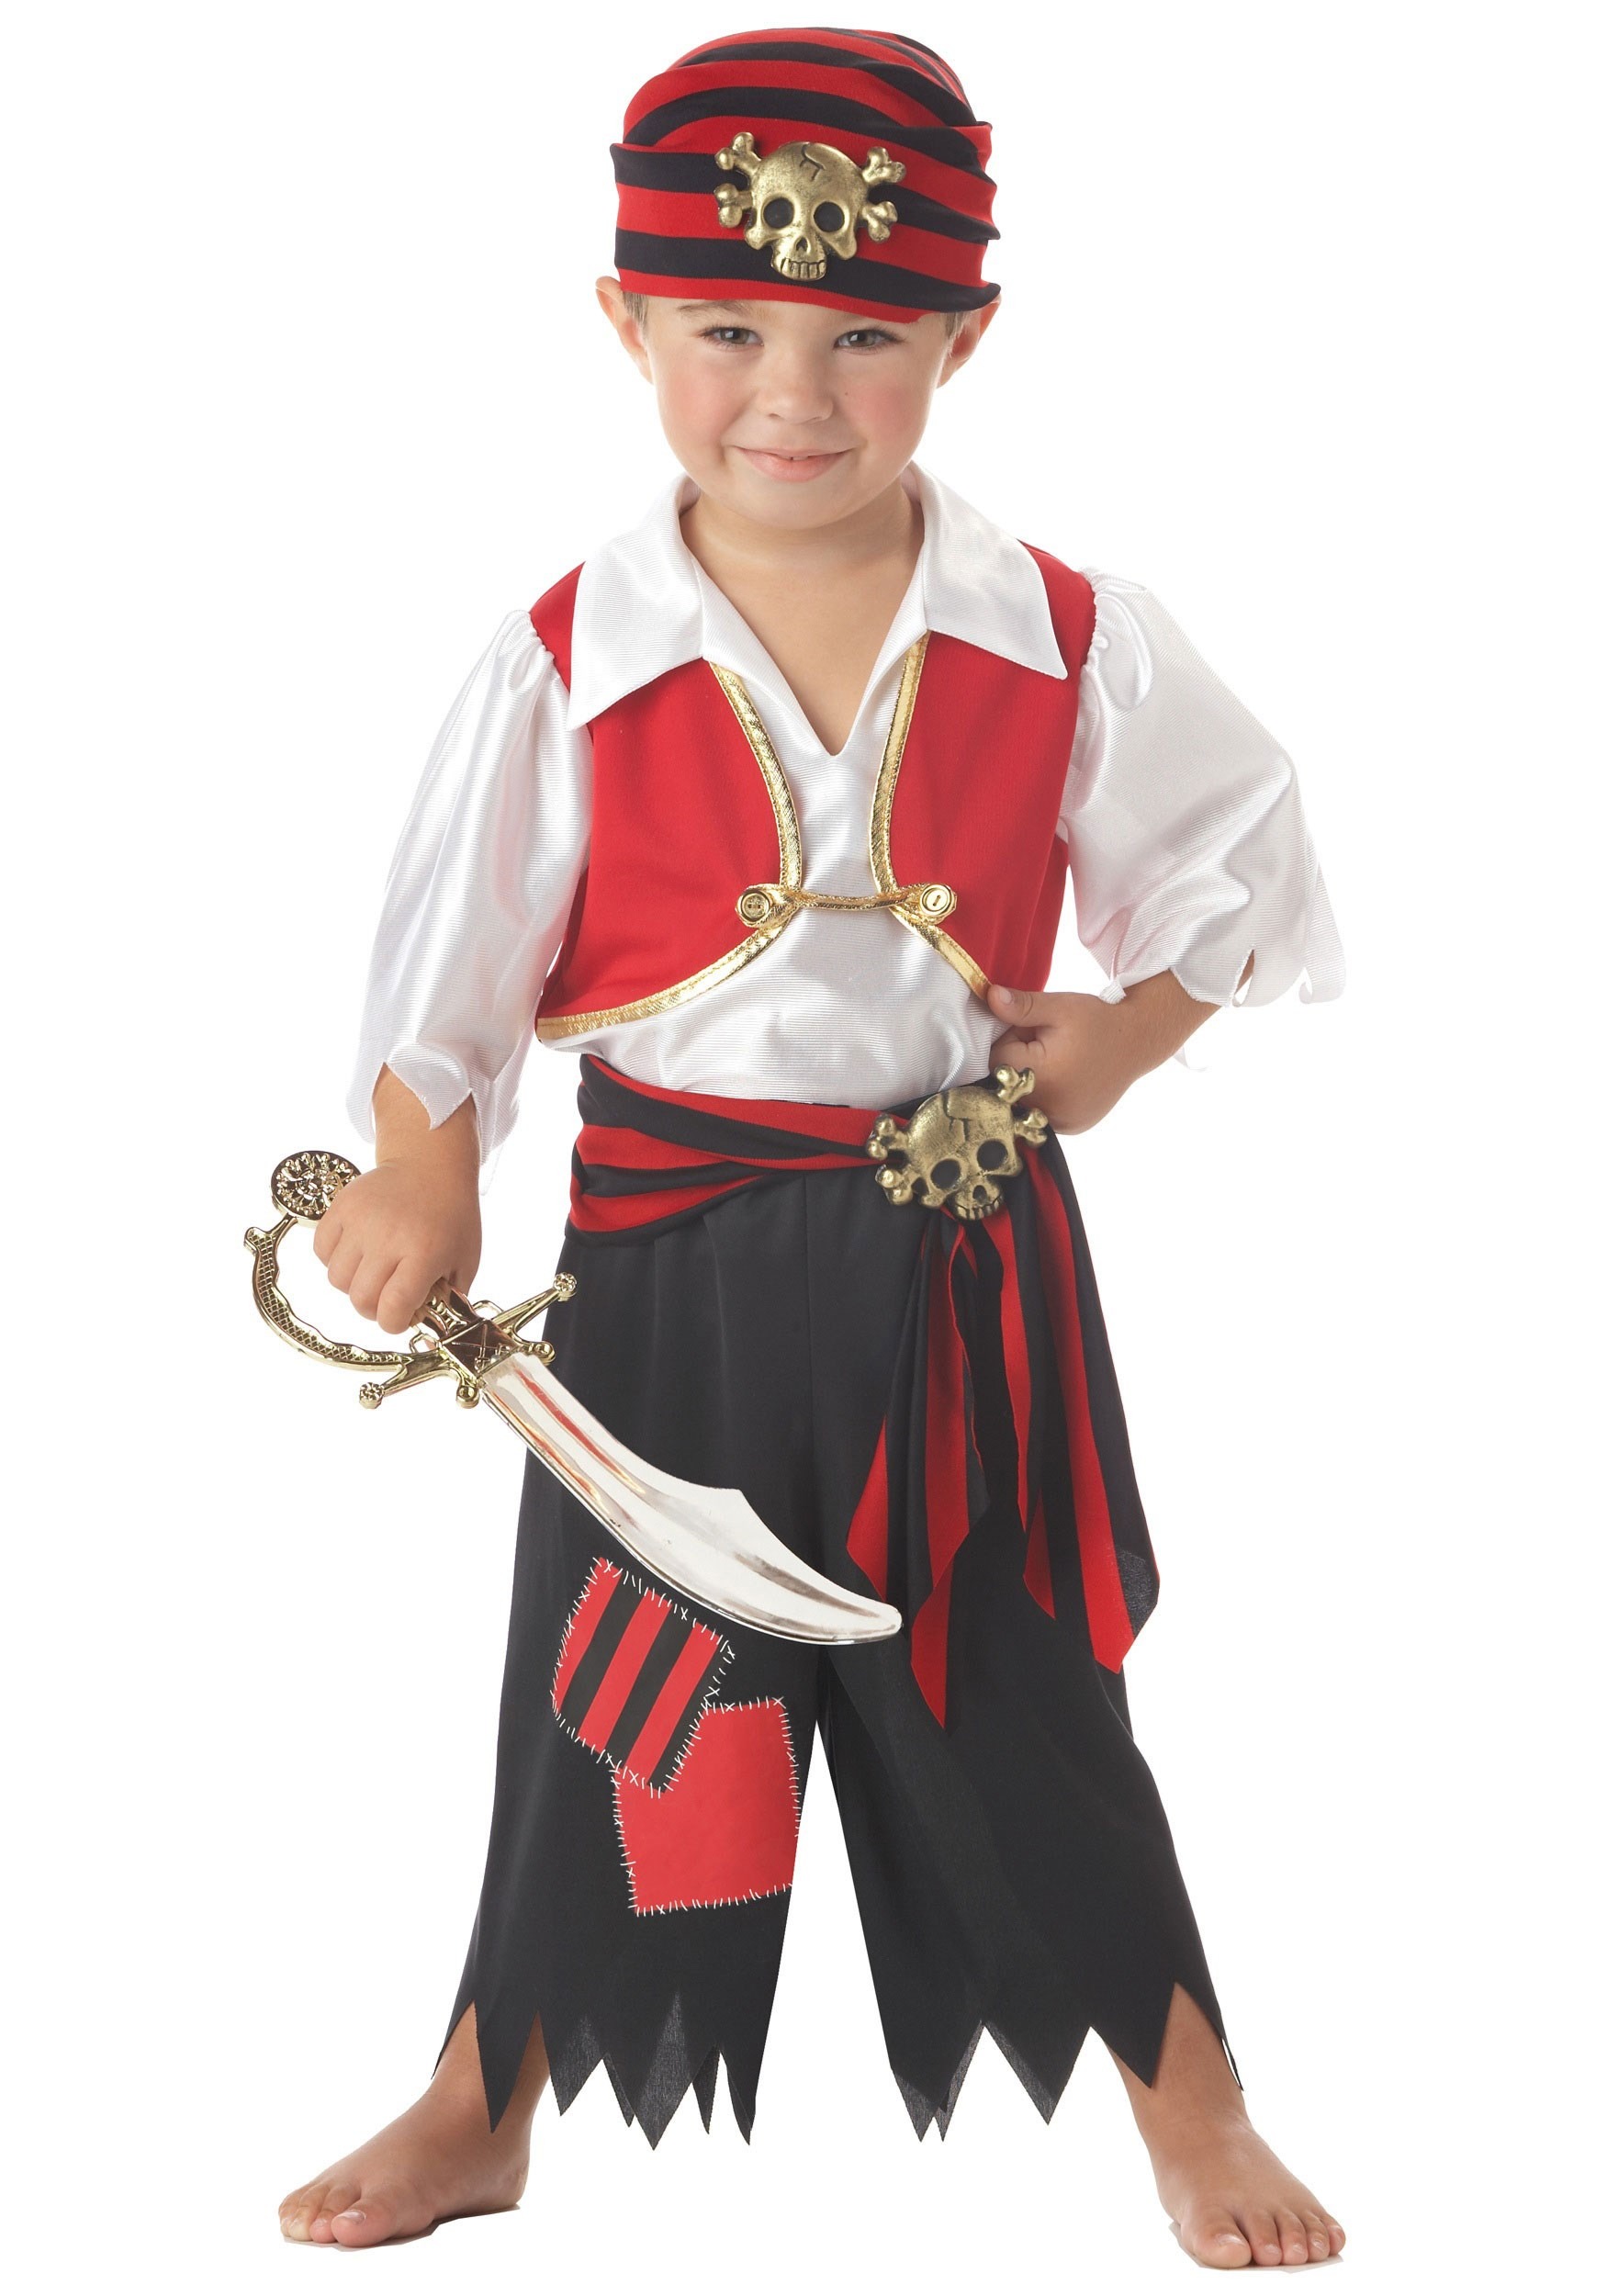 Ahoy Matey Pirate Costume for Toddlers | Kids Pirate Costumes